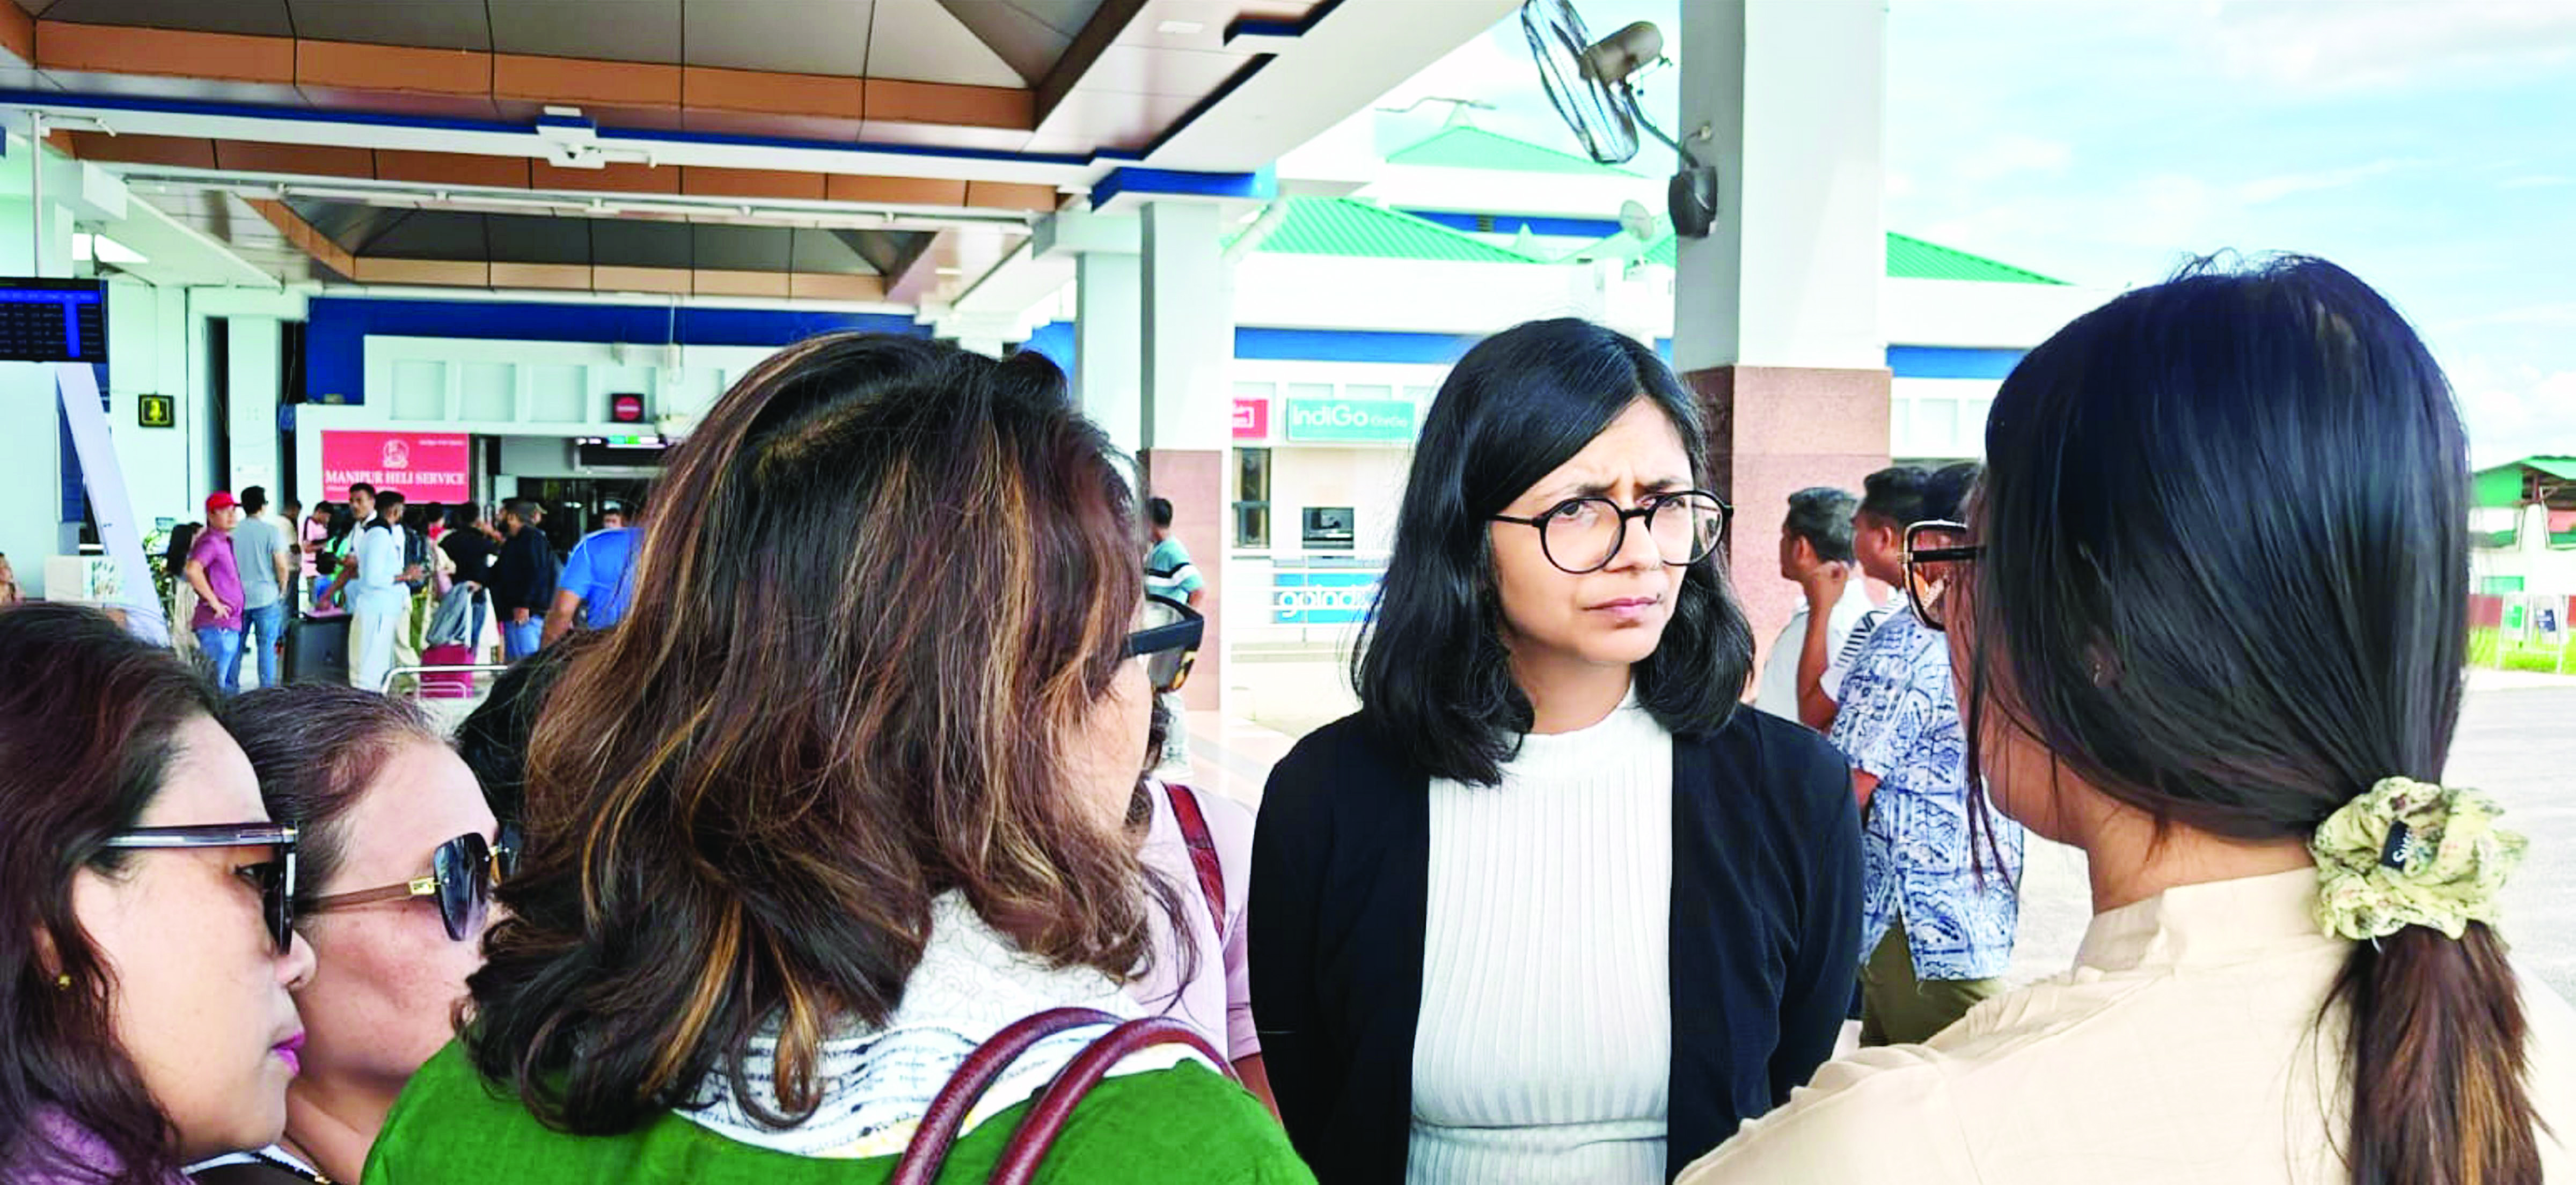 Not politics, in Manipur to assist   people, says DCW chief Maliwal